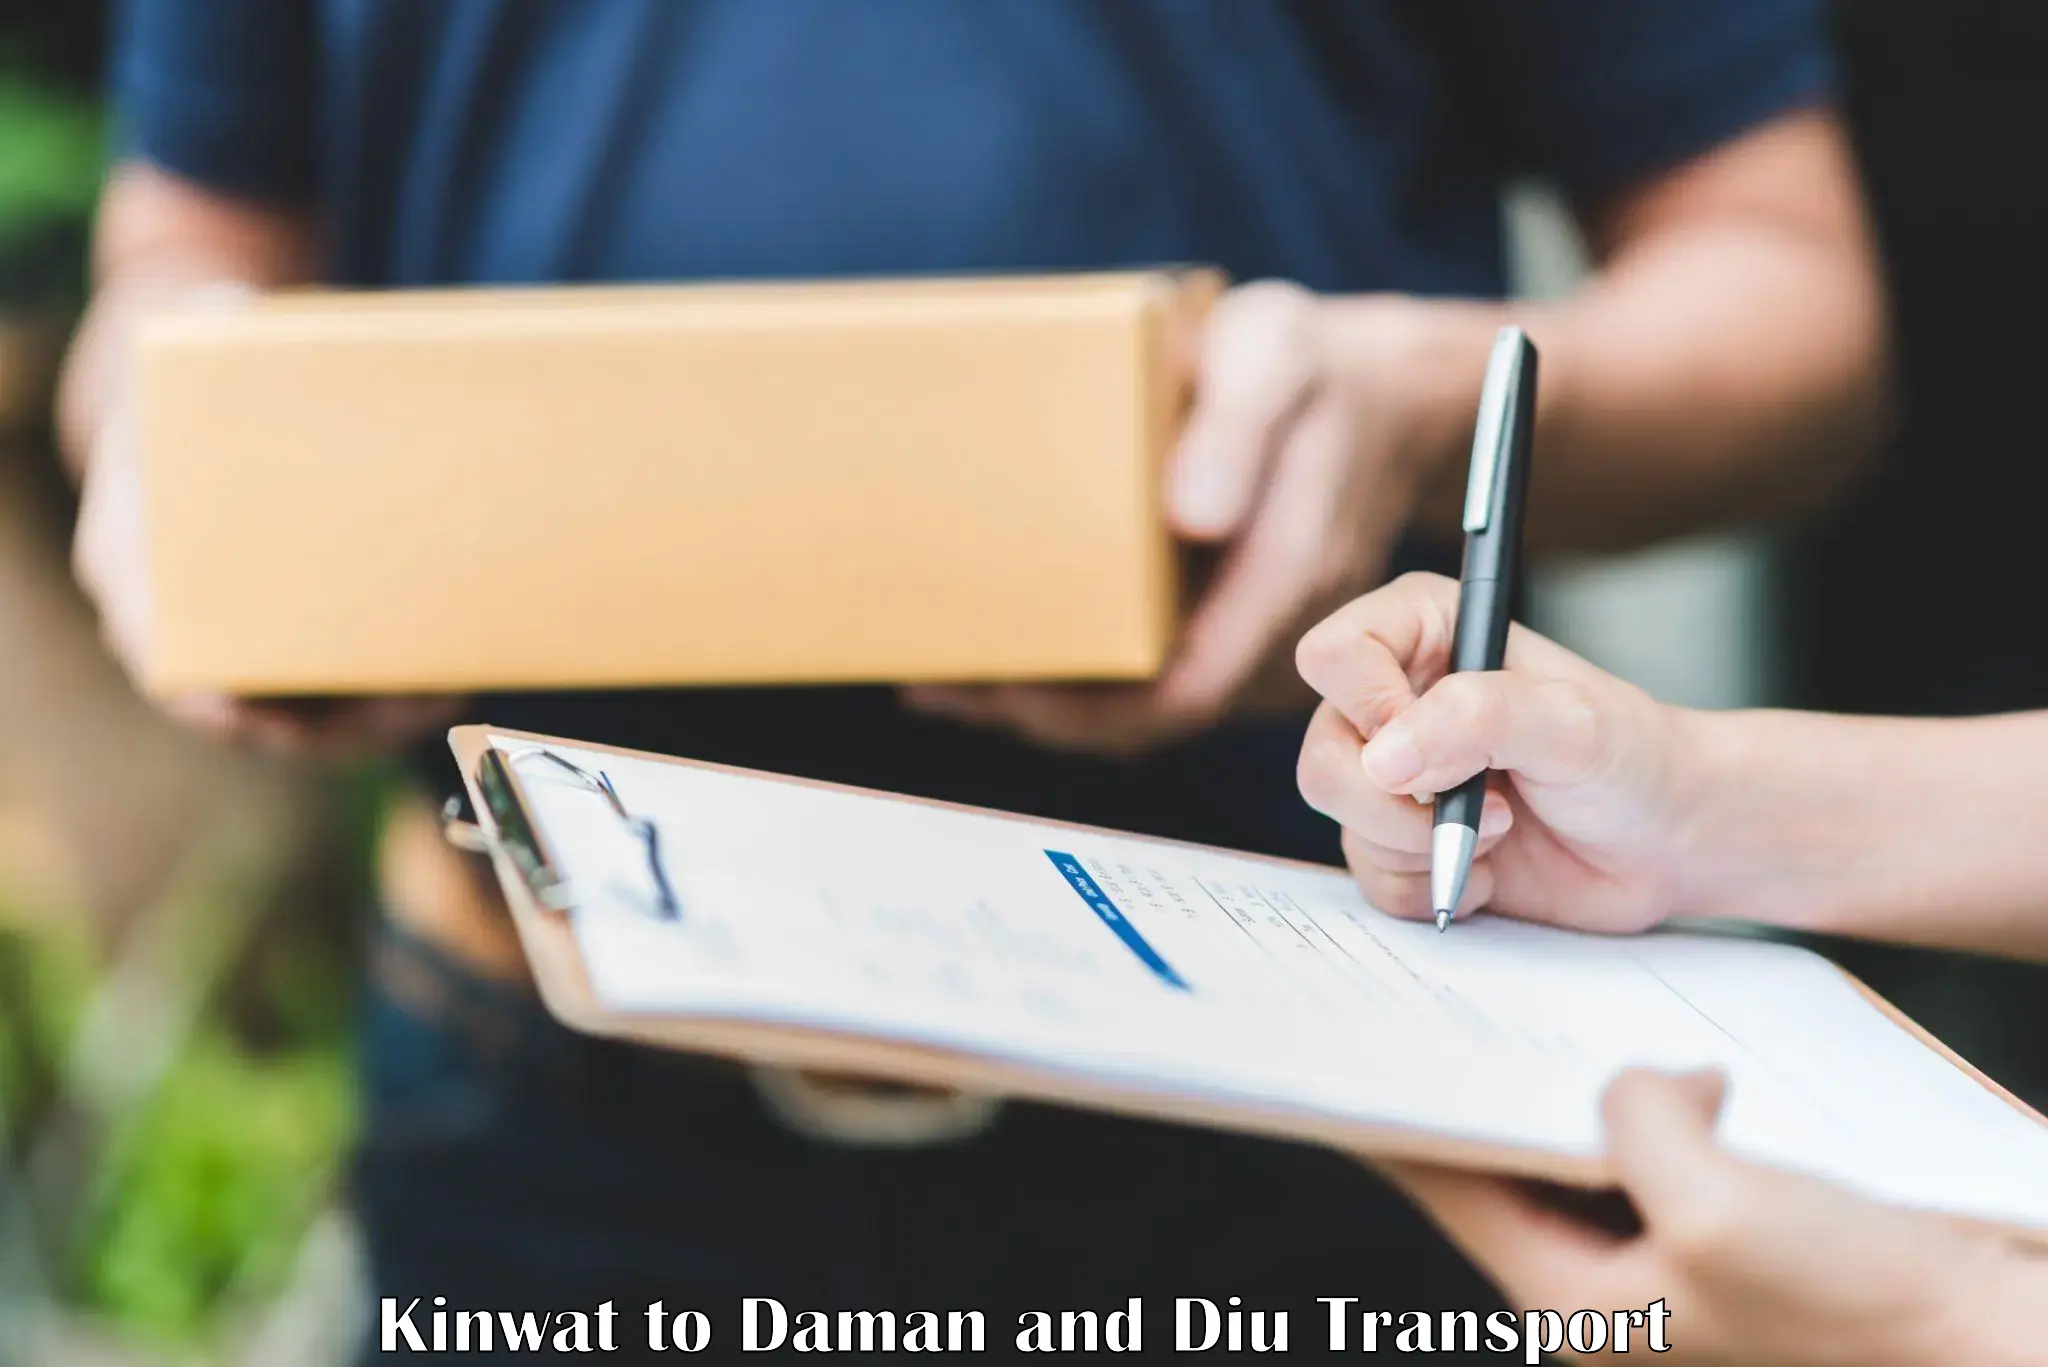 Domestic goods transportation services Kinwat to Diu